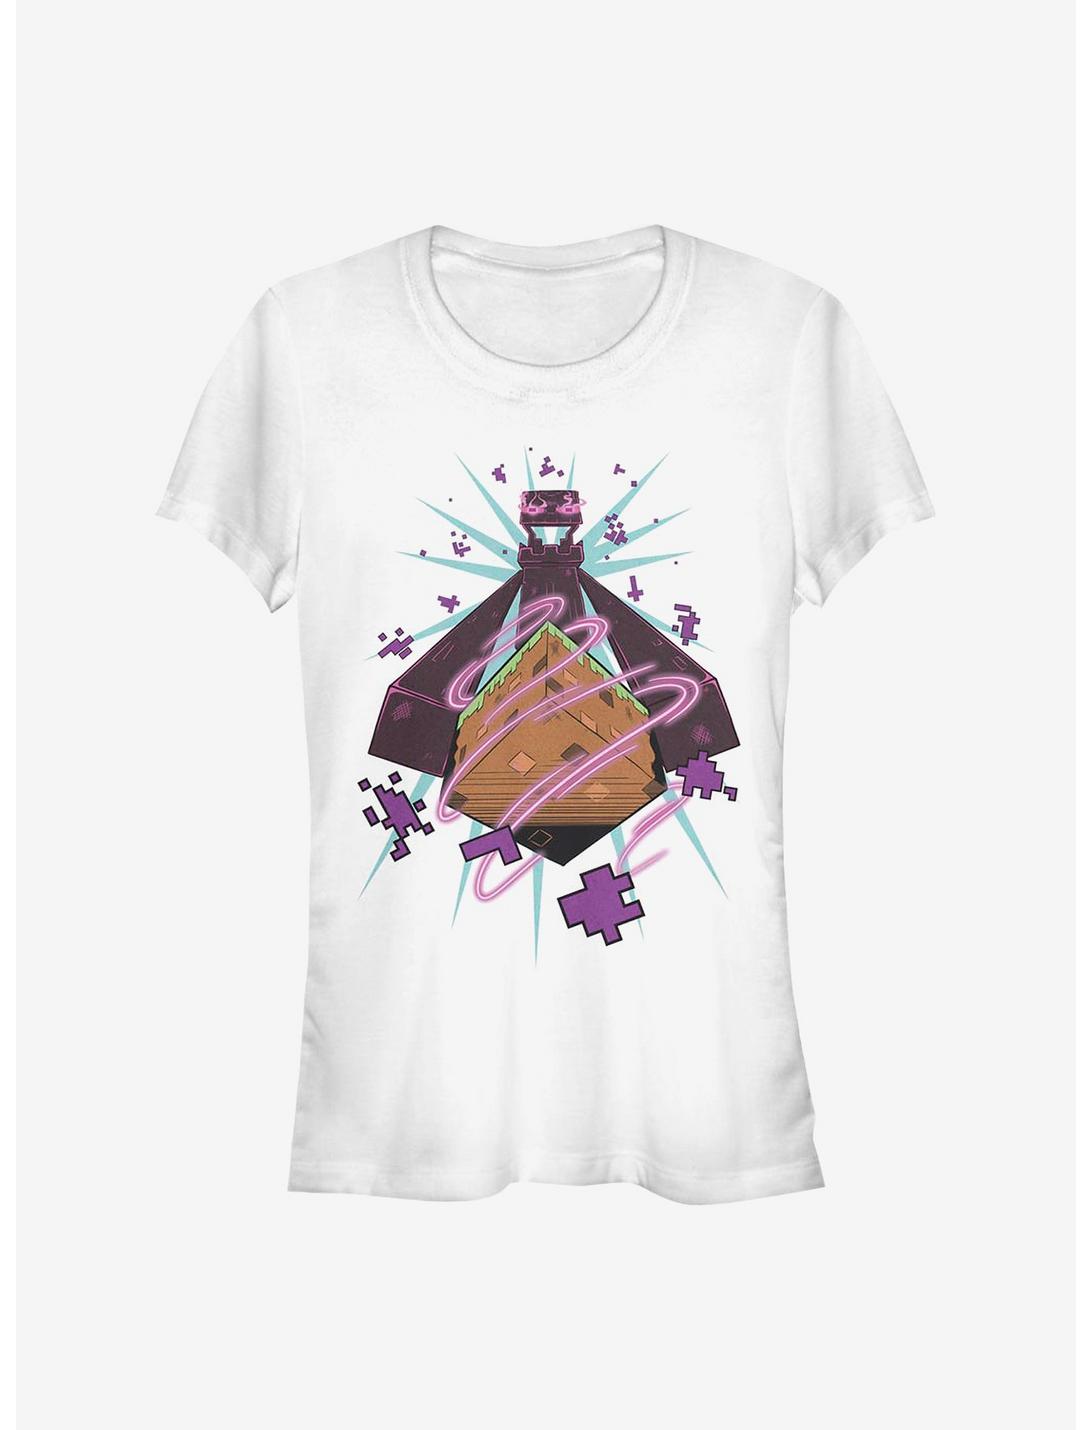 Minecraft Enderman Forced Perspective Girls T-Shirt, WHITE, hi-res